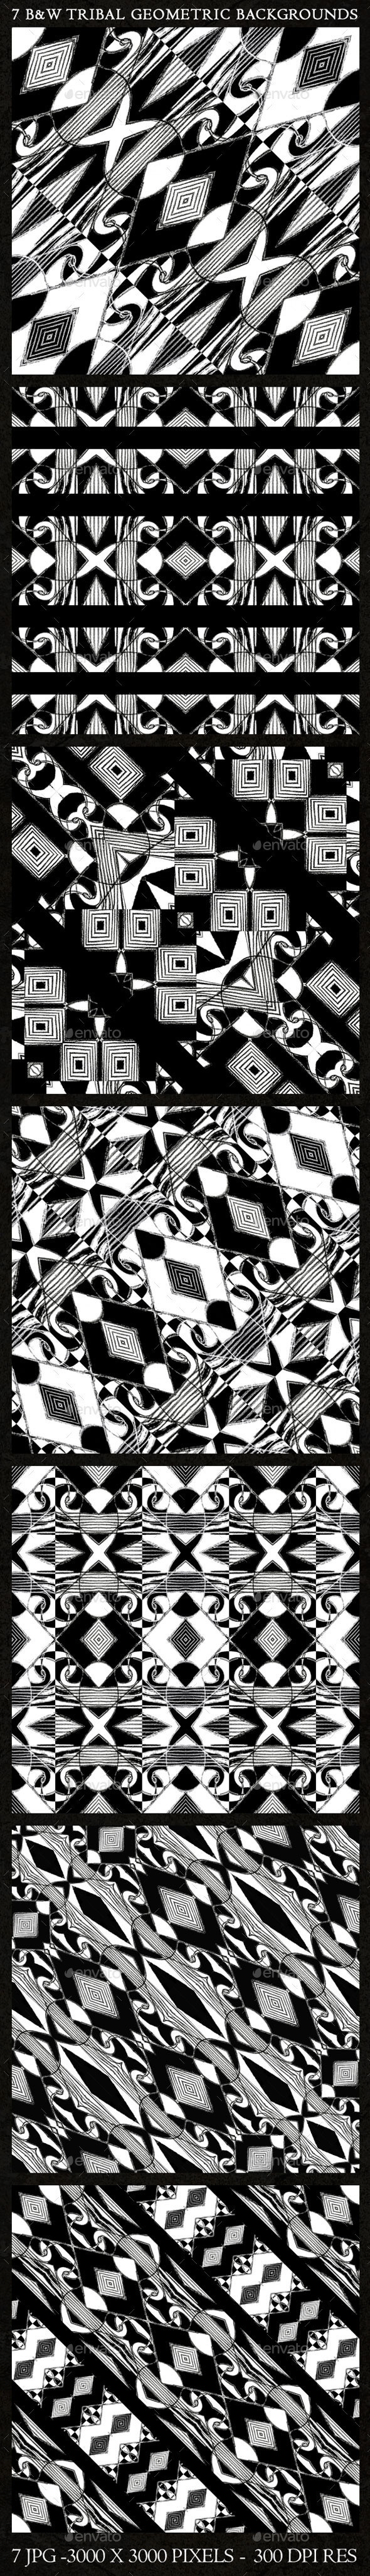 Preview business 7 bw tribal geometric backgrounds